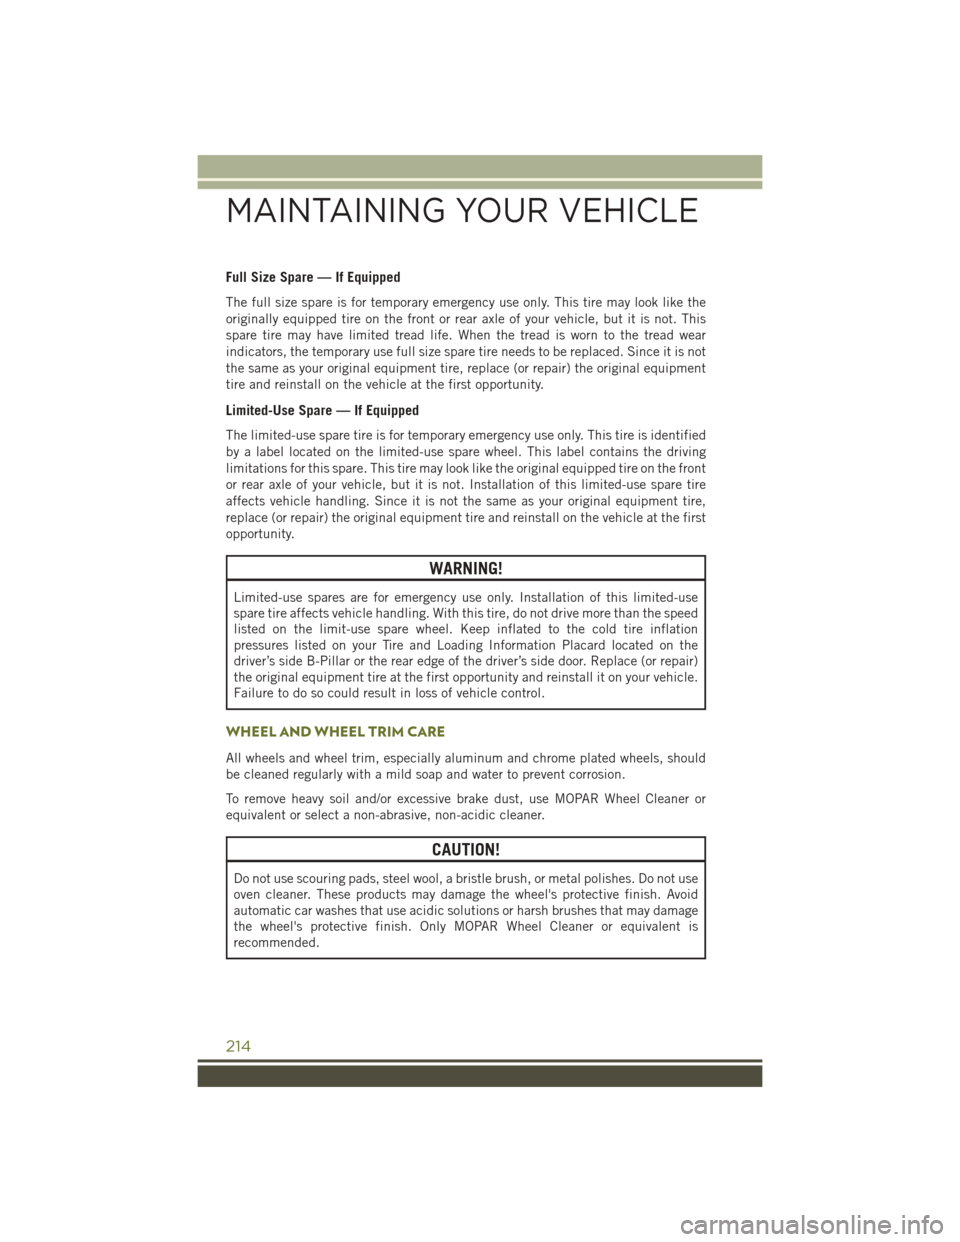 JEEP CHEROKEE 2016 KL / 5.G Owners Manual Full Size Spare — If Equipped
The full size spare is for temporary emergency use only. This tire may look like the
originally equipped tire on the front or rear axle of your vehicle, but it is not. 